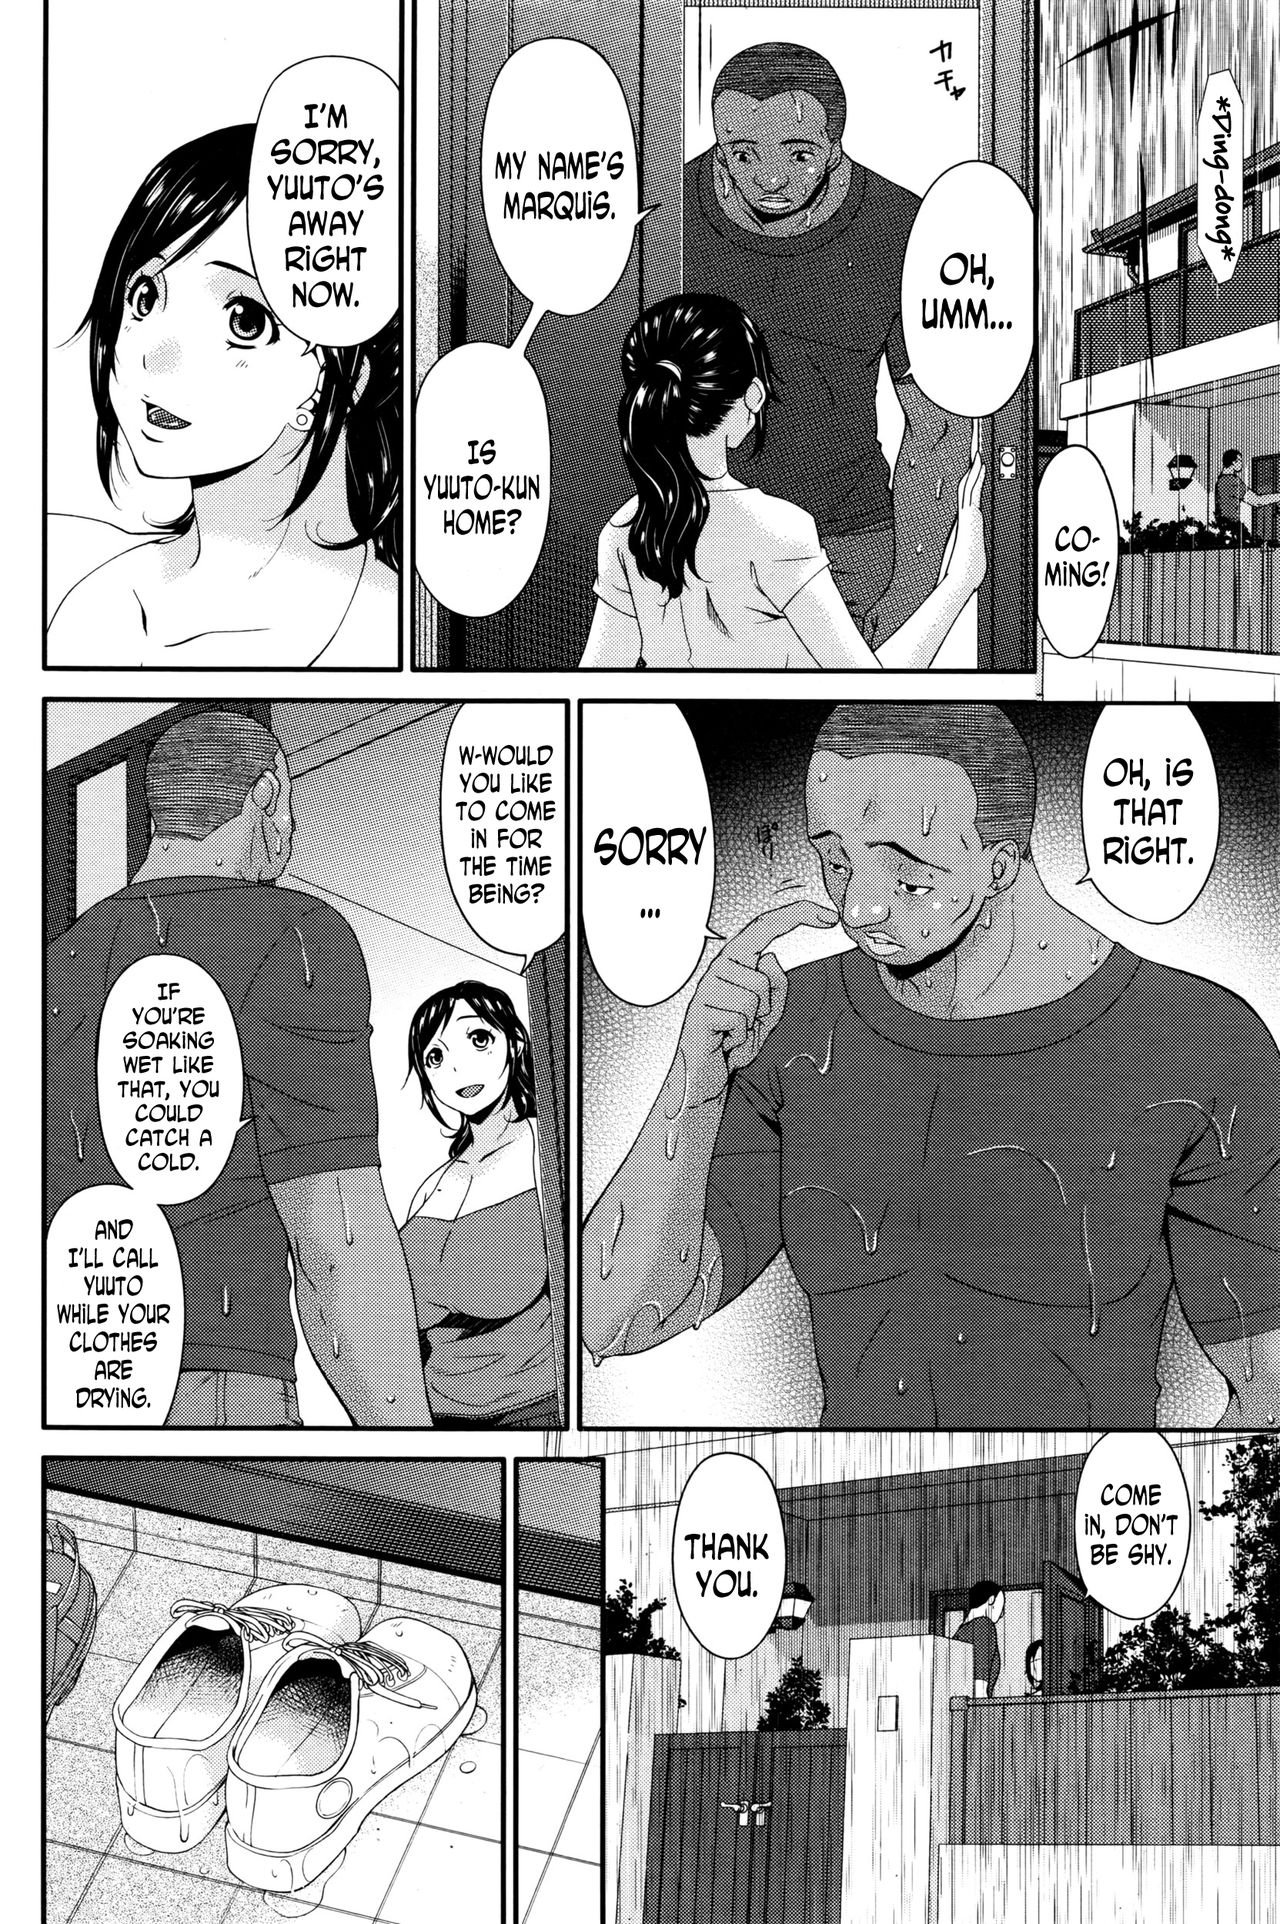 [Bai Asuka] Youbo | Impregnated Mother Ch. 1-2 [English] [N04h] page 4 full